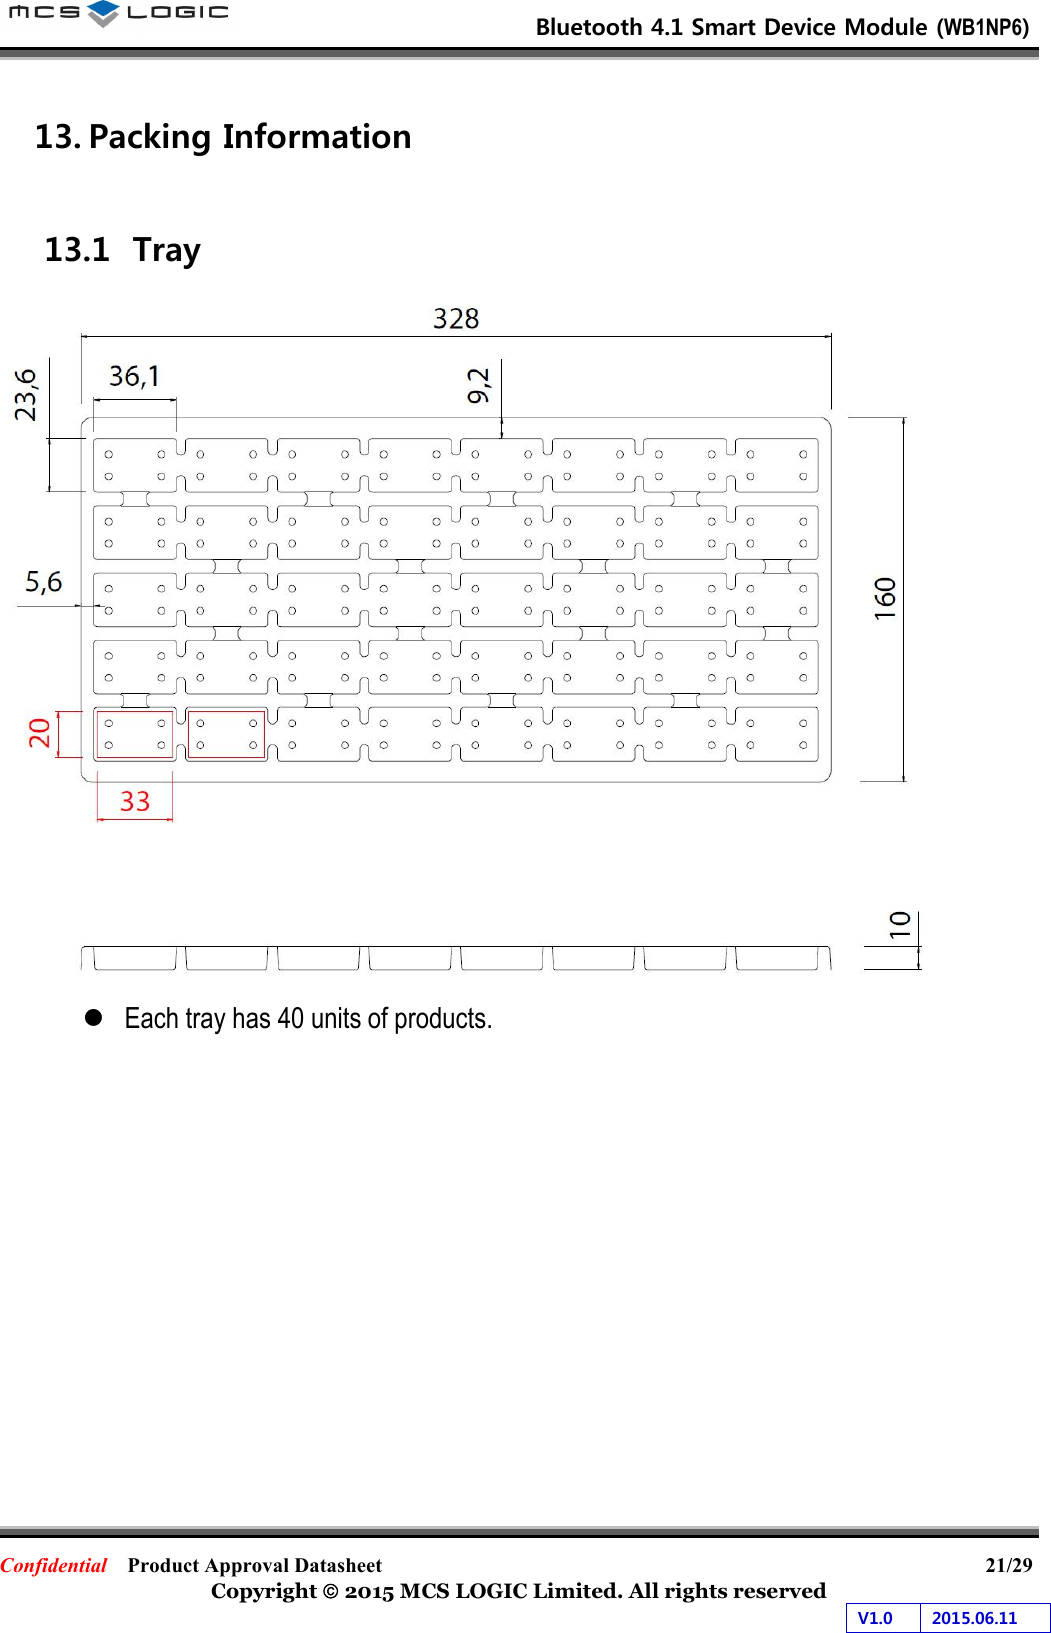                           Bluetooth 4.1 Smart Device Module (WB1NP6)                        Confidential    Product Approval Datasheet                                                           21/29 Copyright  2015 MCS LOGIC Limited. All rights reserved V1.0  2015.06.11  13. Packing Information  13.1 Tray     Each tray has 40 units of products.    